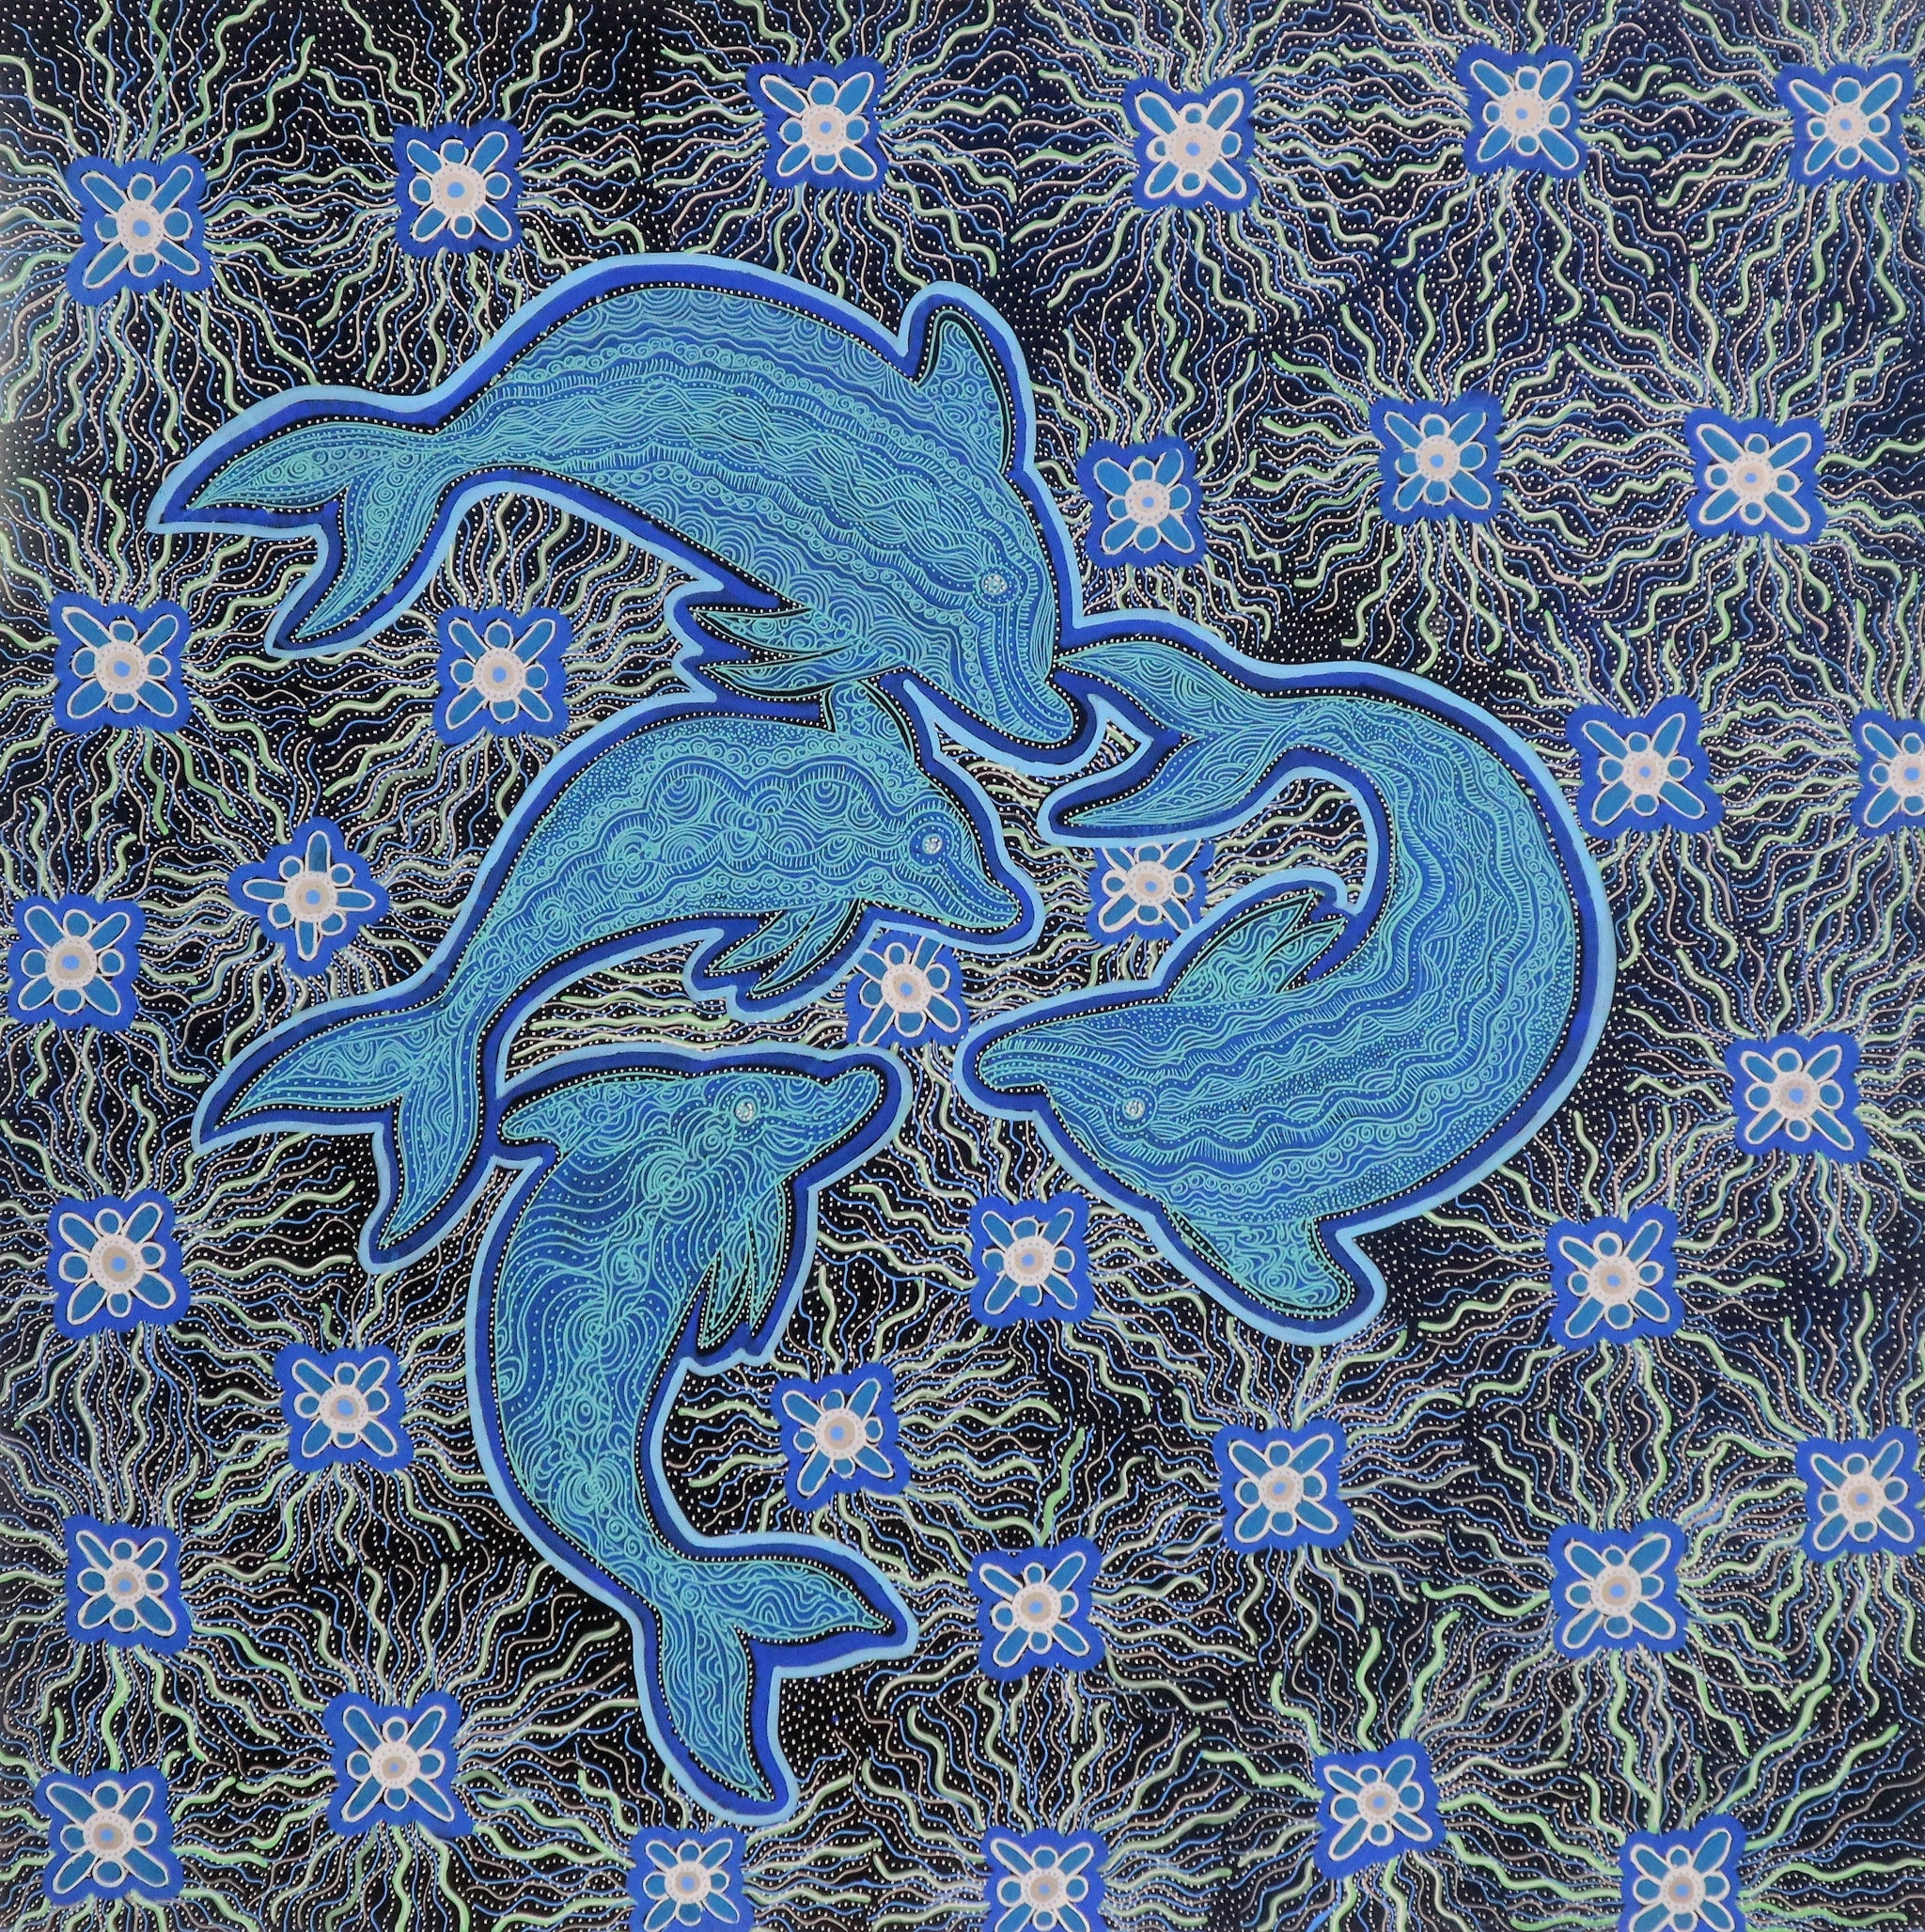 "Dolphin Dreaming" by Christine Winmar